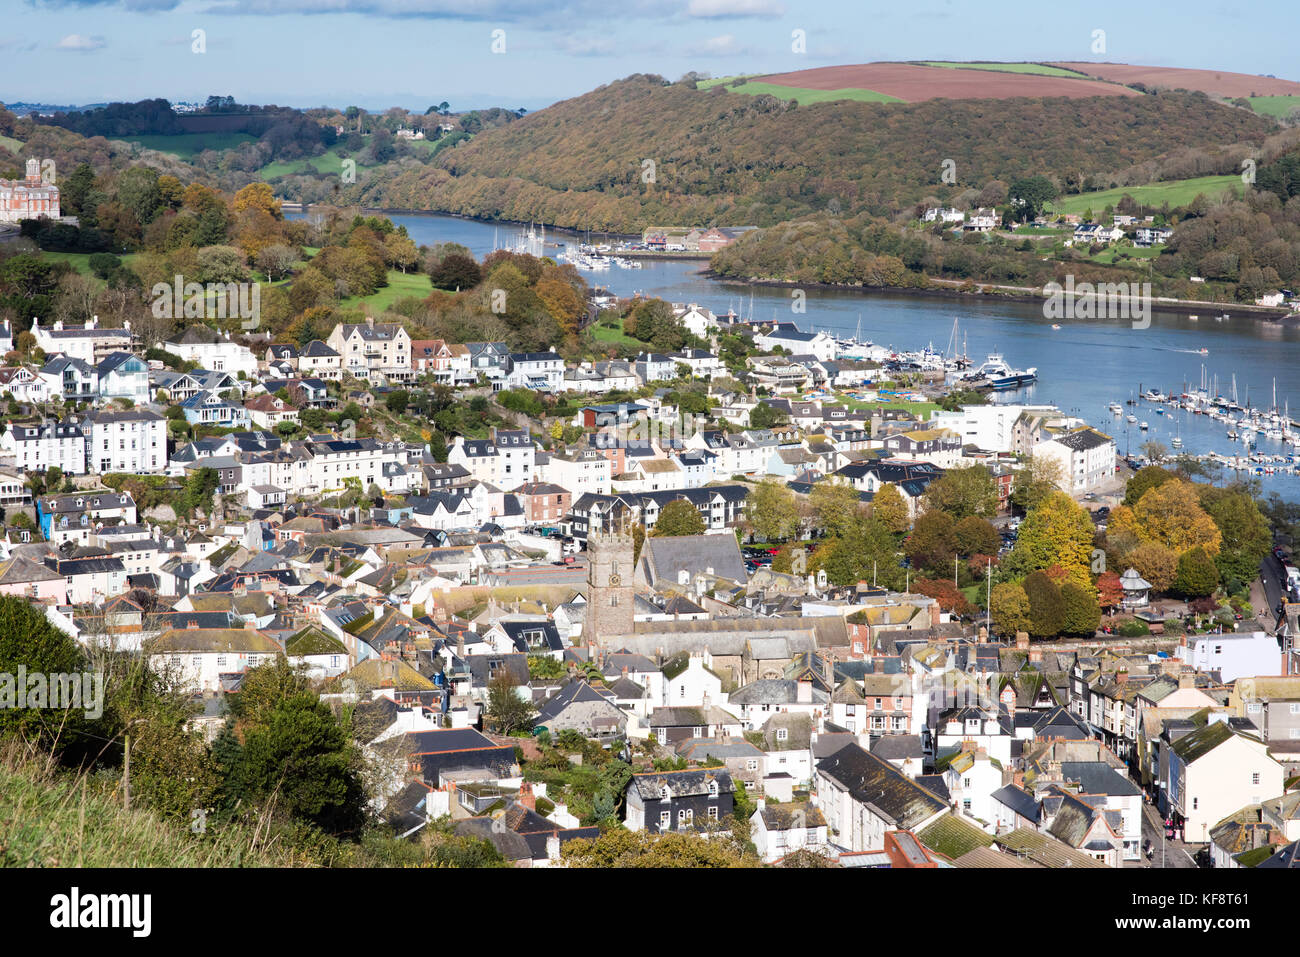 View of Dartmouth looking up the River Dart on a sunny autumnal day with the South Devon town nestled by the river Stock Photo